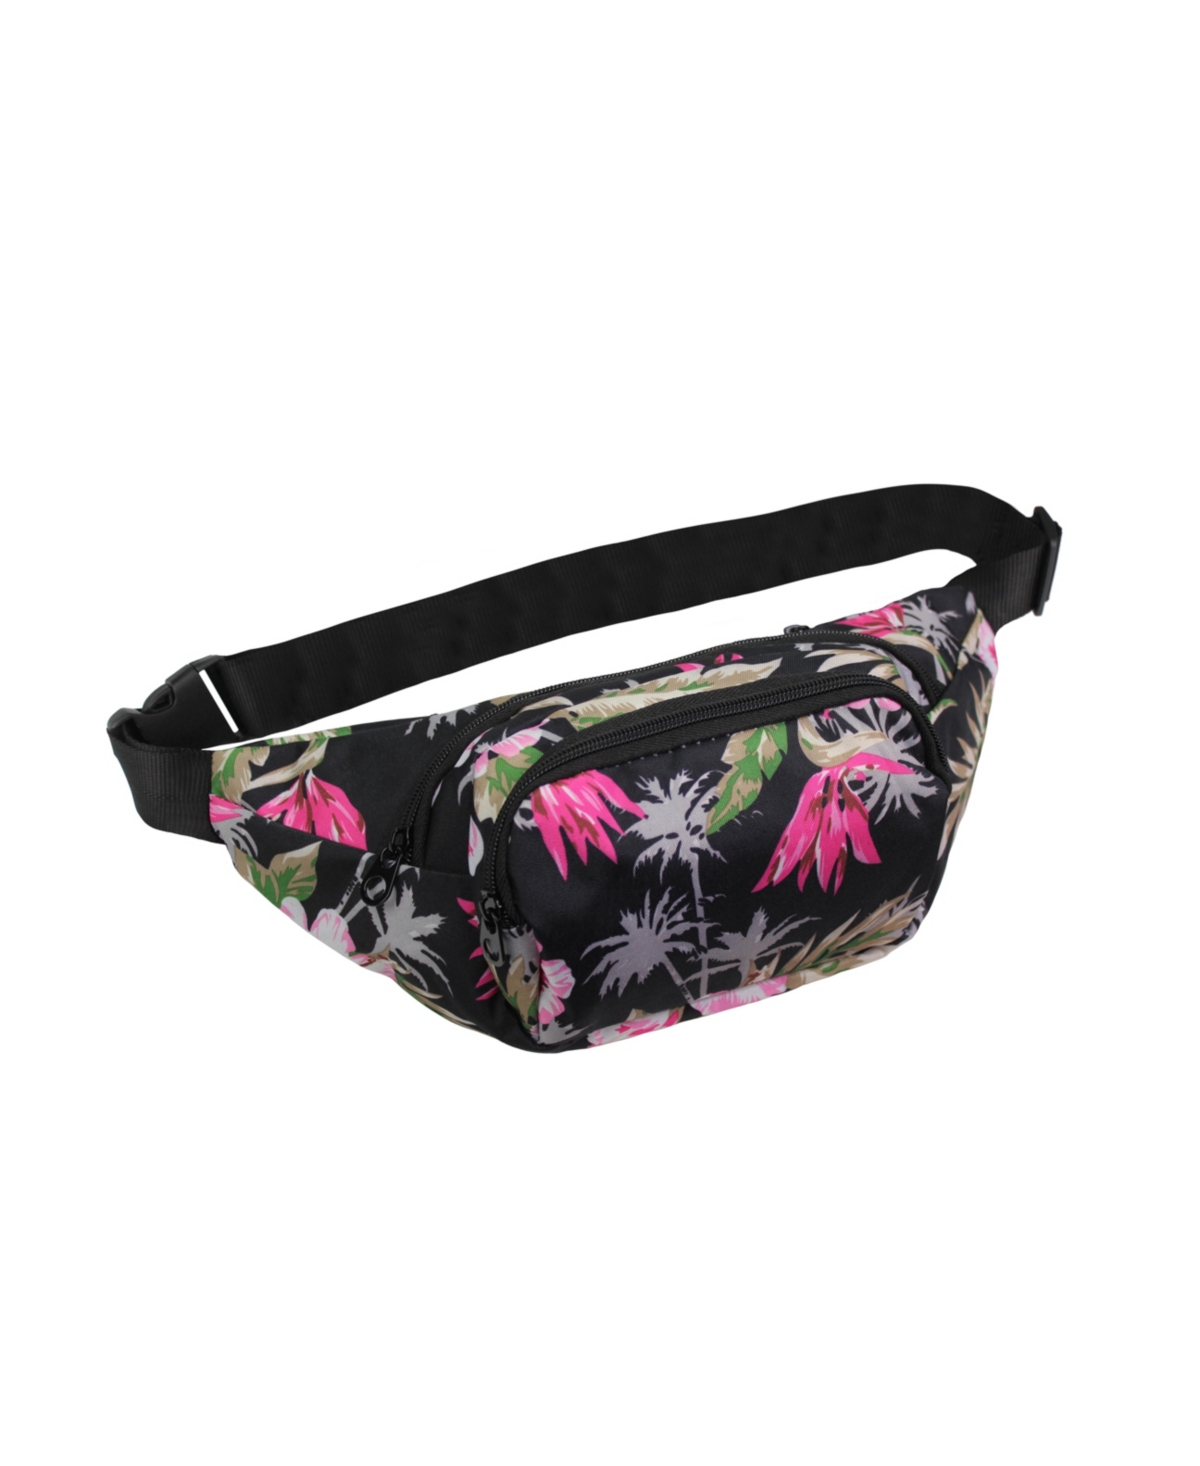 Floral 14-Inch Fanny Pack Adjustable Crossbody Waist Pack - Roses